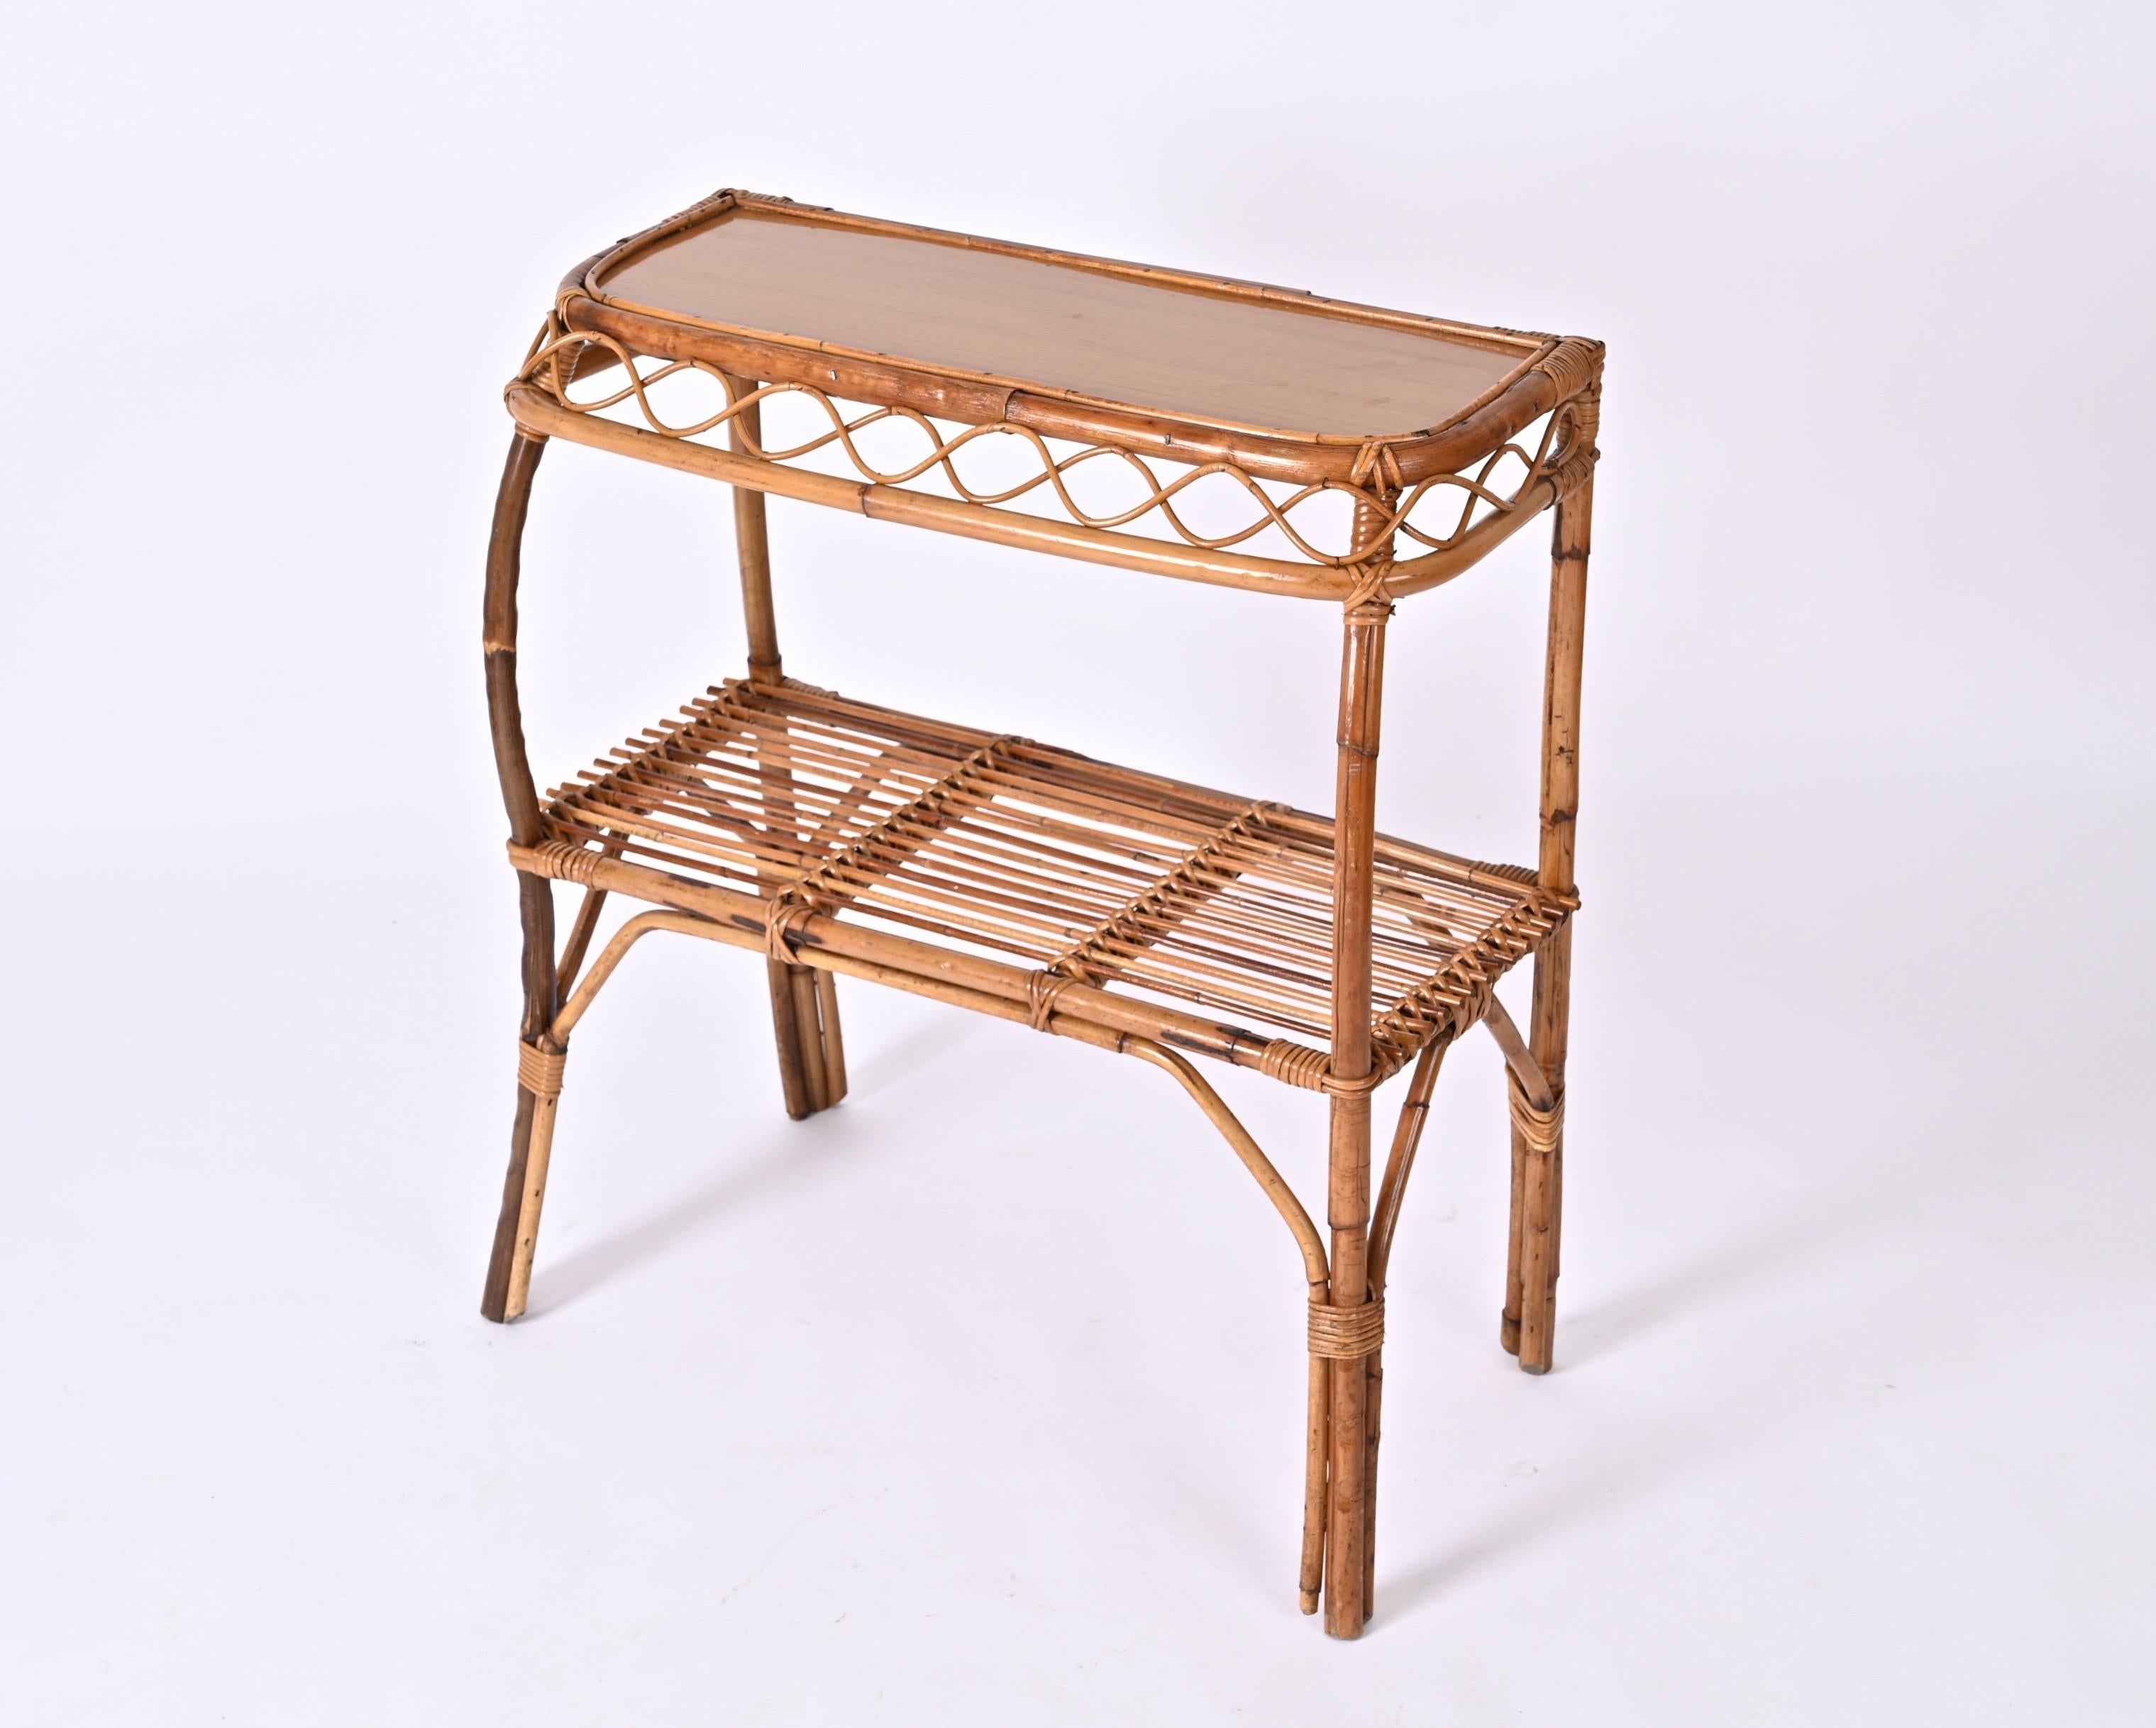 Midcentury Bamboo and Rattan Cocktail Console Table after Franco Albini, 1960s For Sale 7